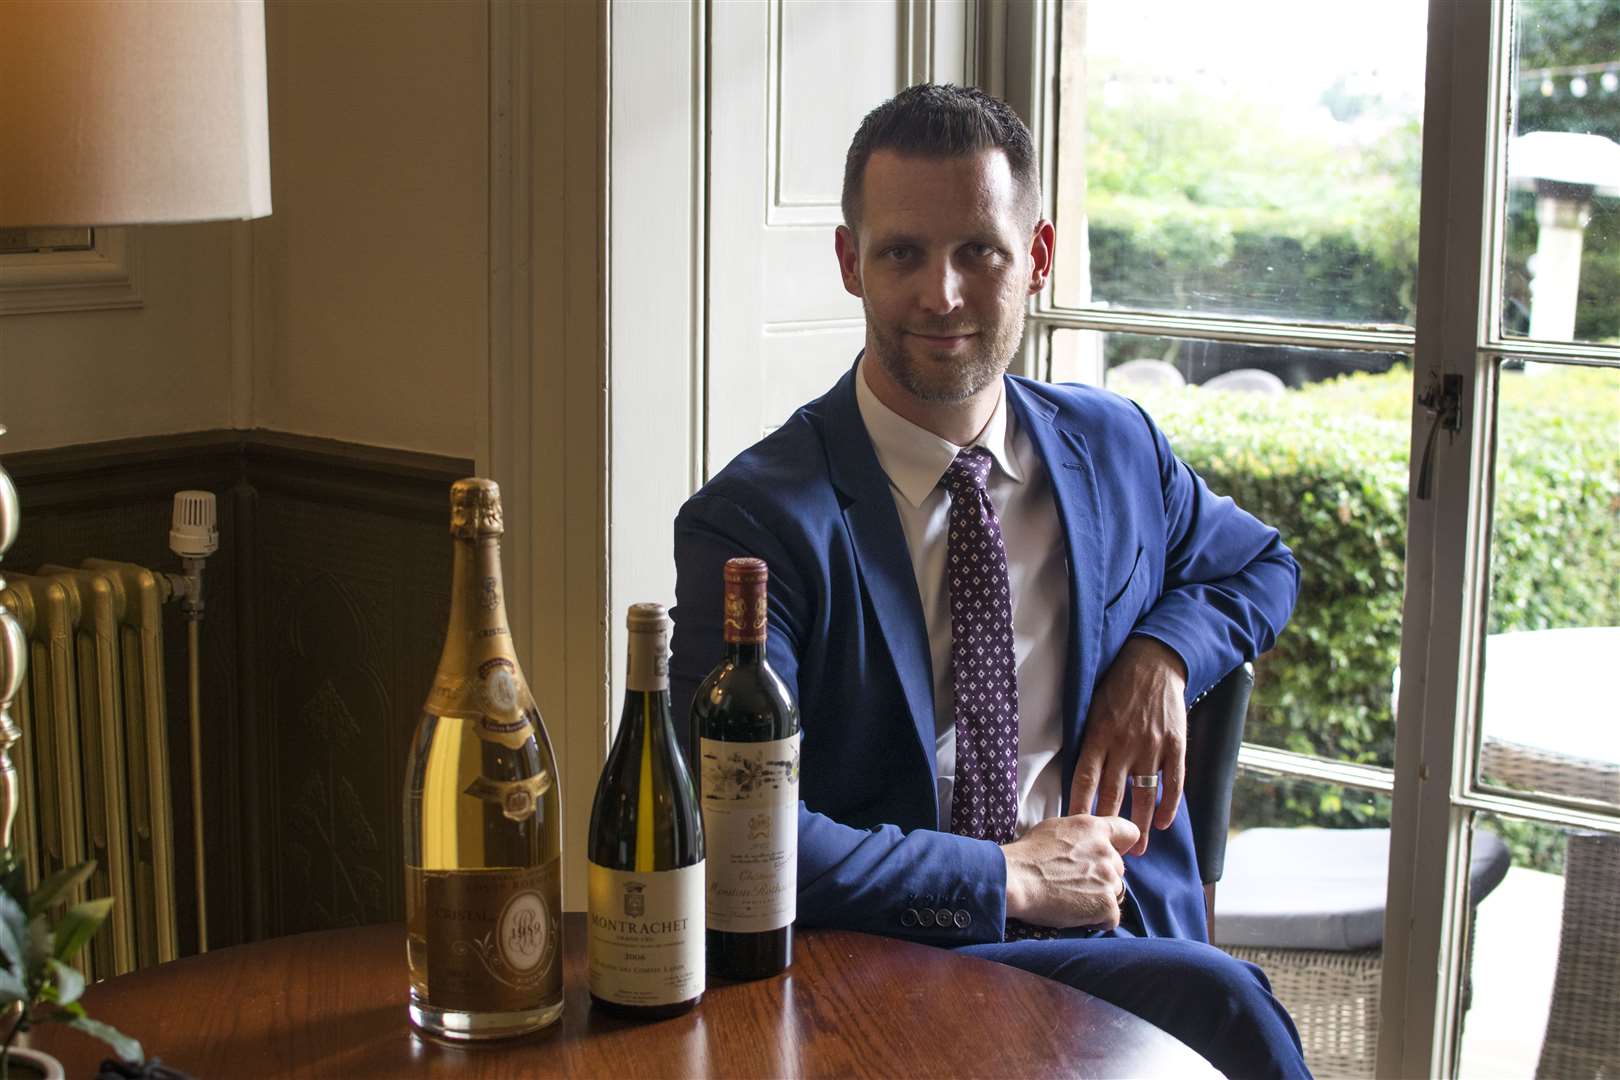 Hotel du Vin general manager James McComas and the three bottles of wine in the silent auction